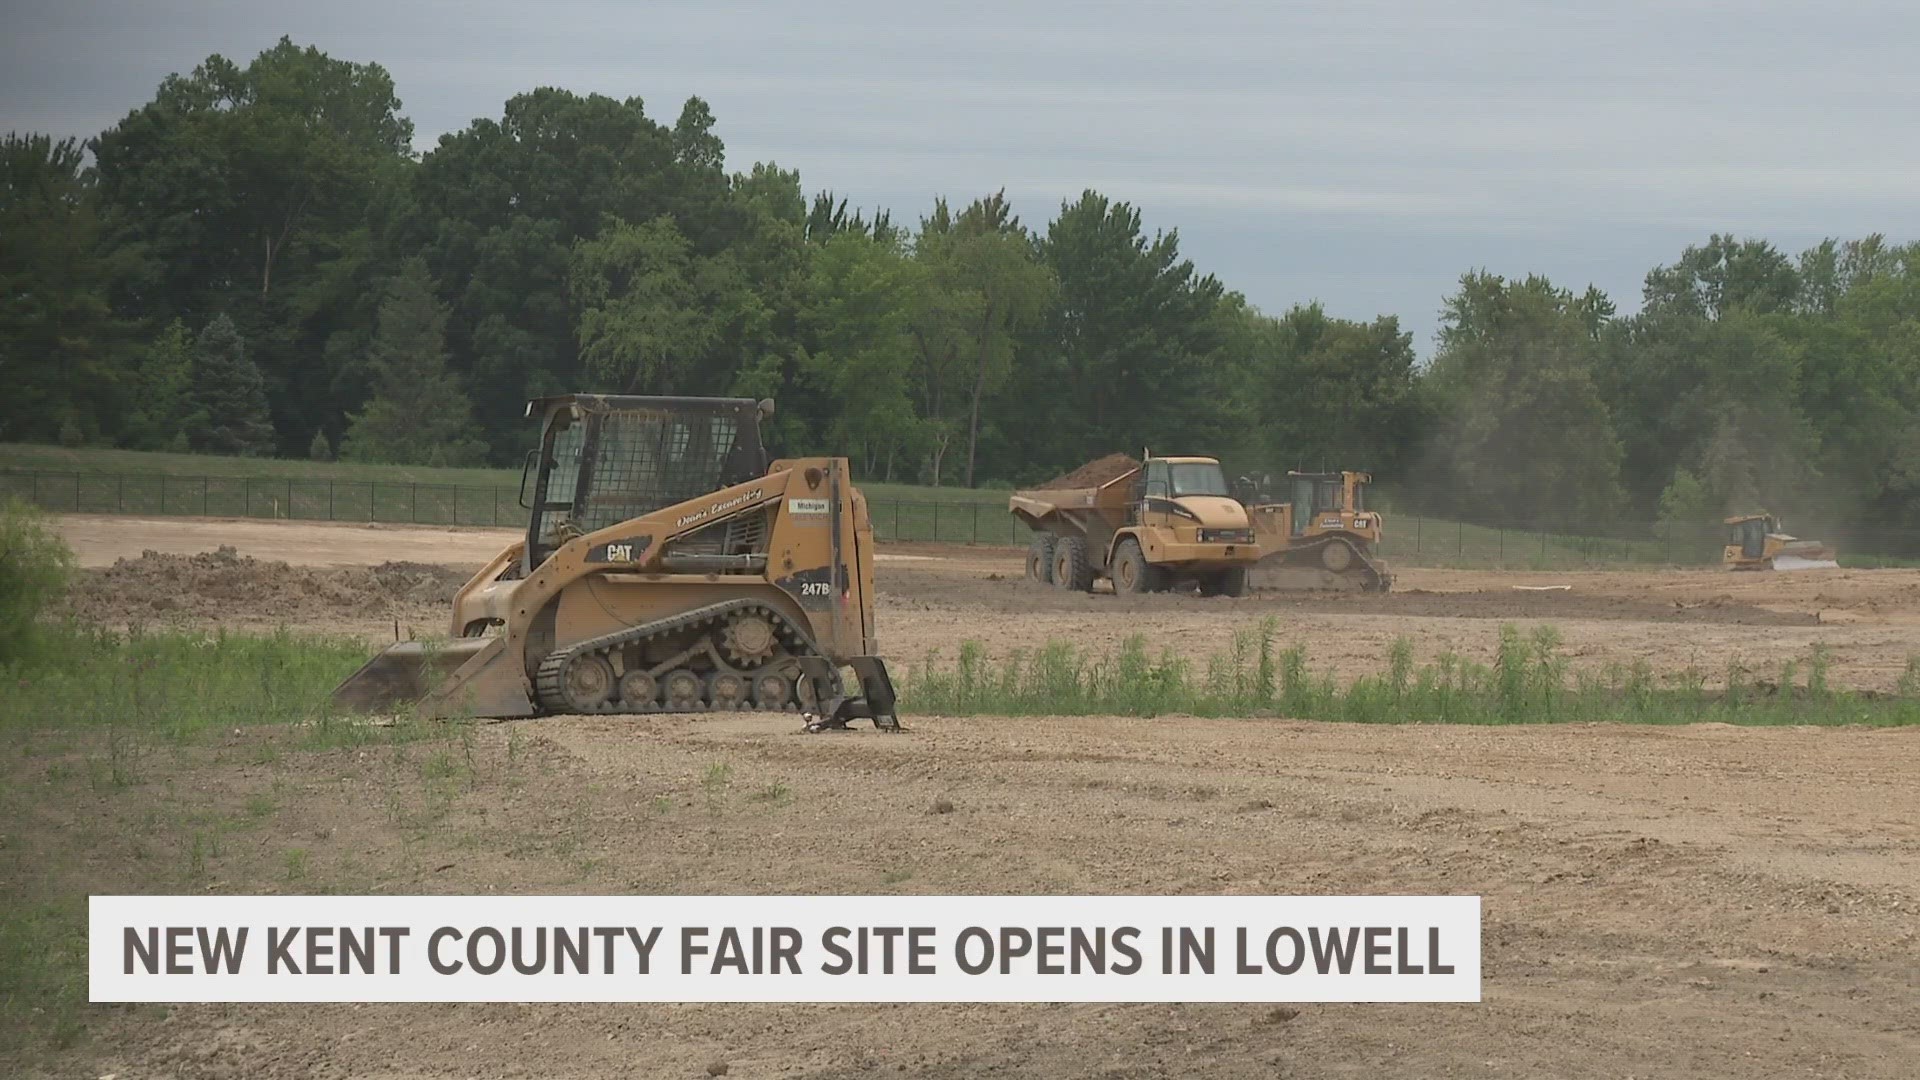 At the Grand Agricultural Center of West Michigan, leaders are gearing up for a venue that will have different kinds of year-round activity.